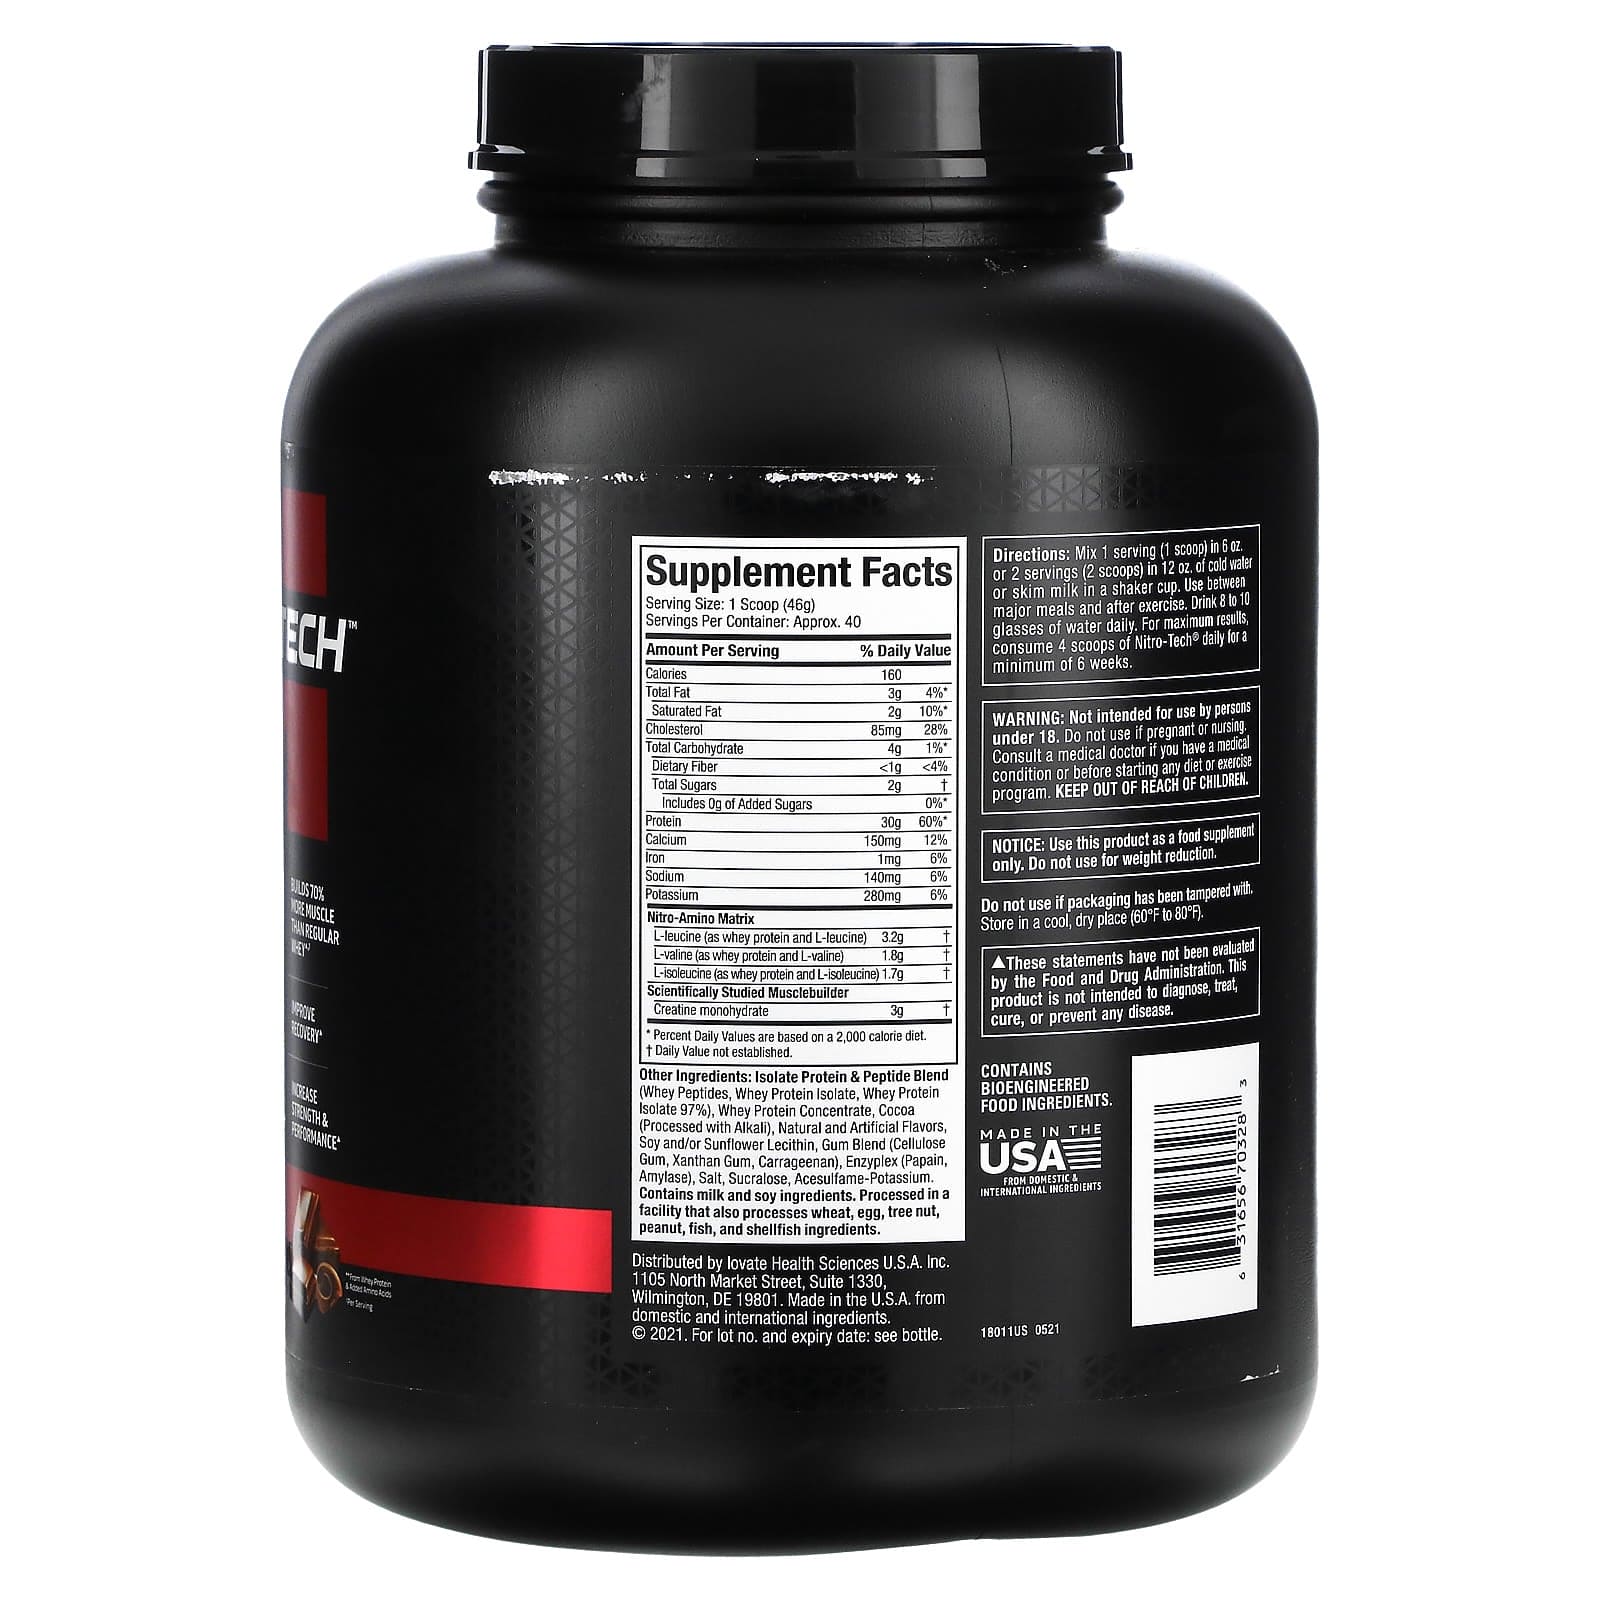 Proteina Muscletech Nitro Tech Whey 4 Lbs - Body Fit Supplements